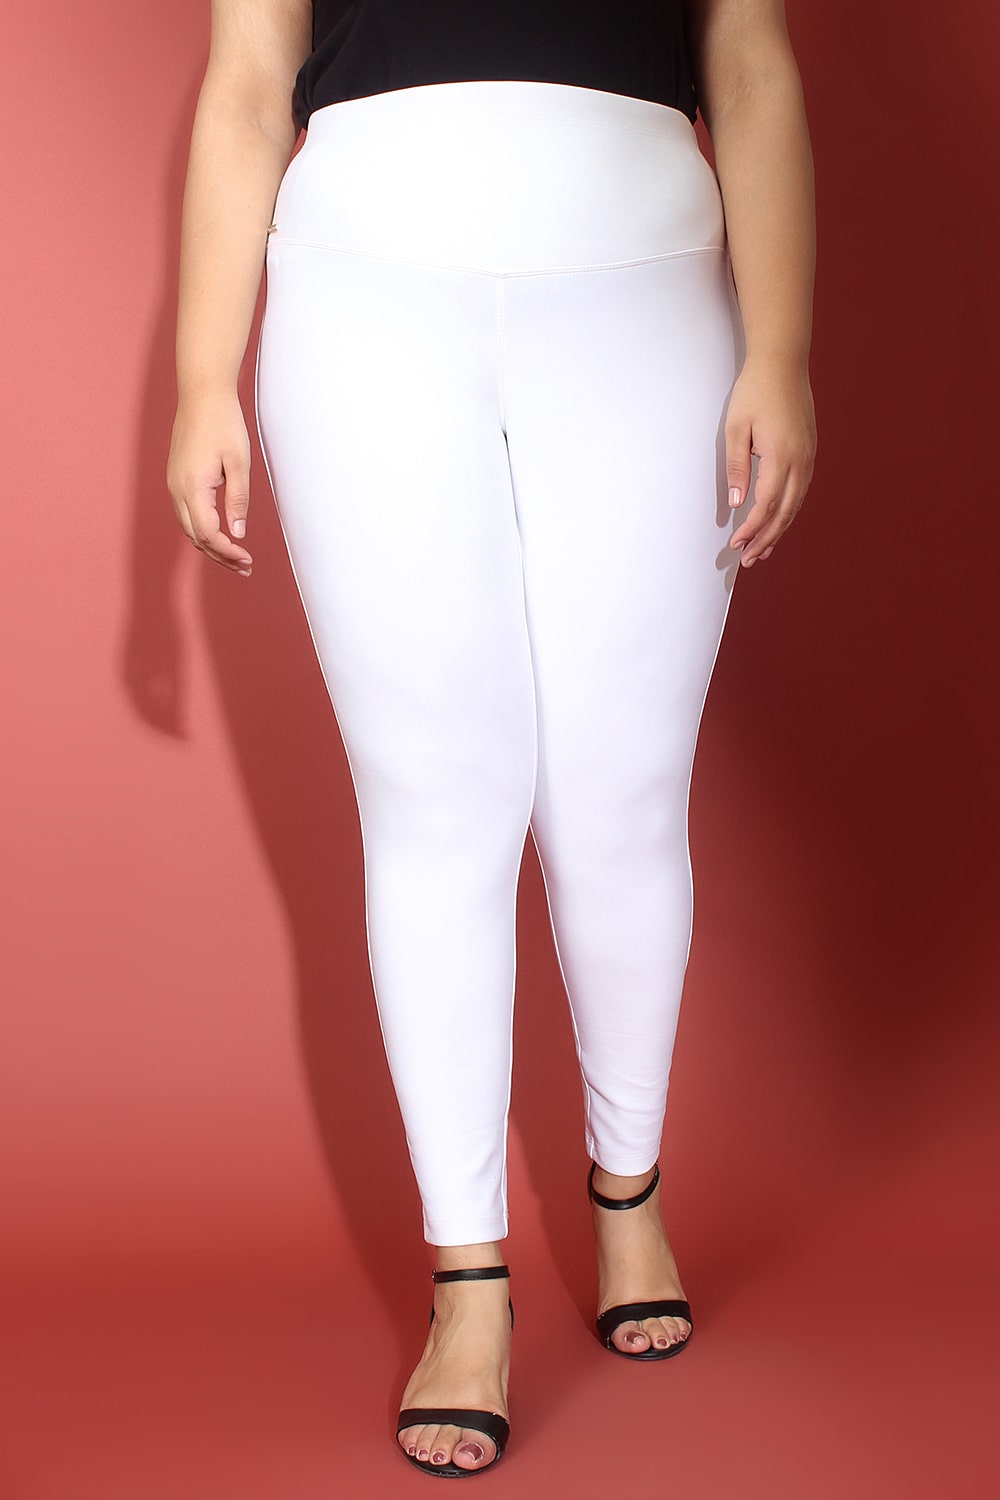 YUNAFFT Yoga Pants for Women Clearance Plus Size Fashion Casual